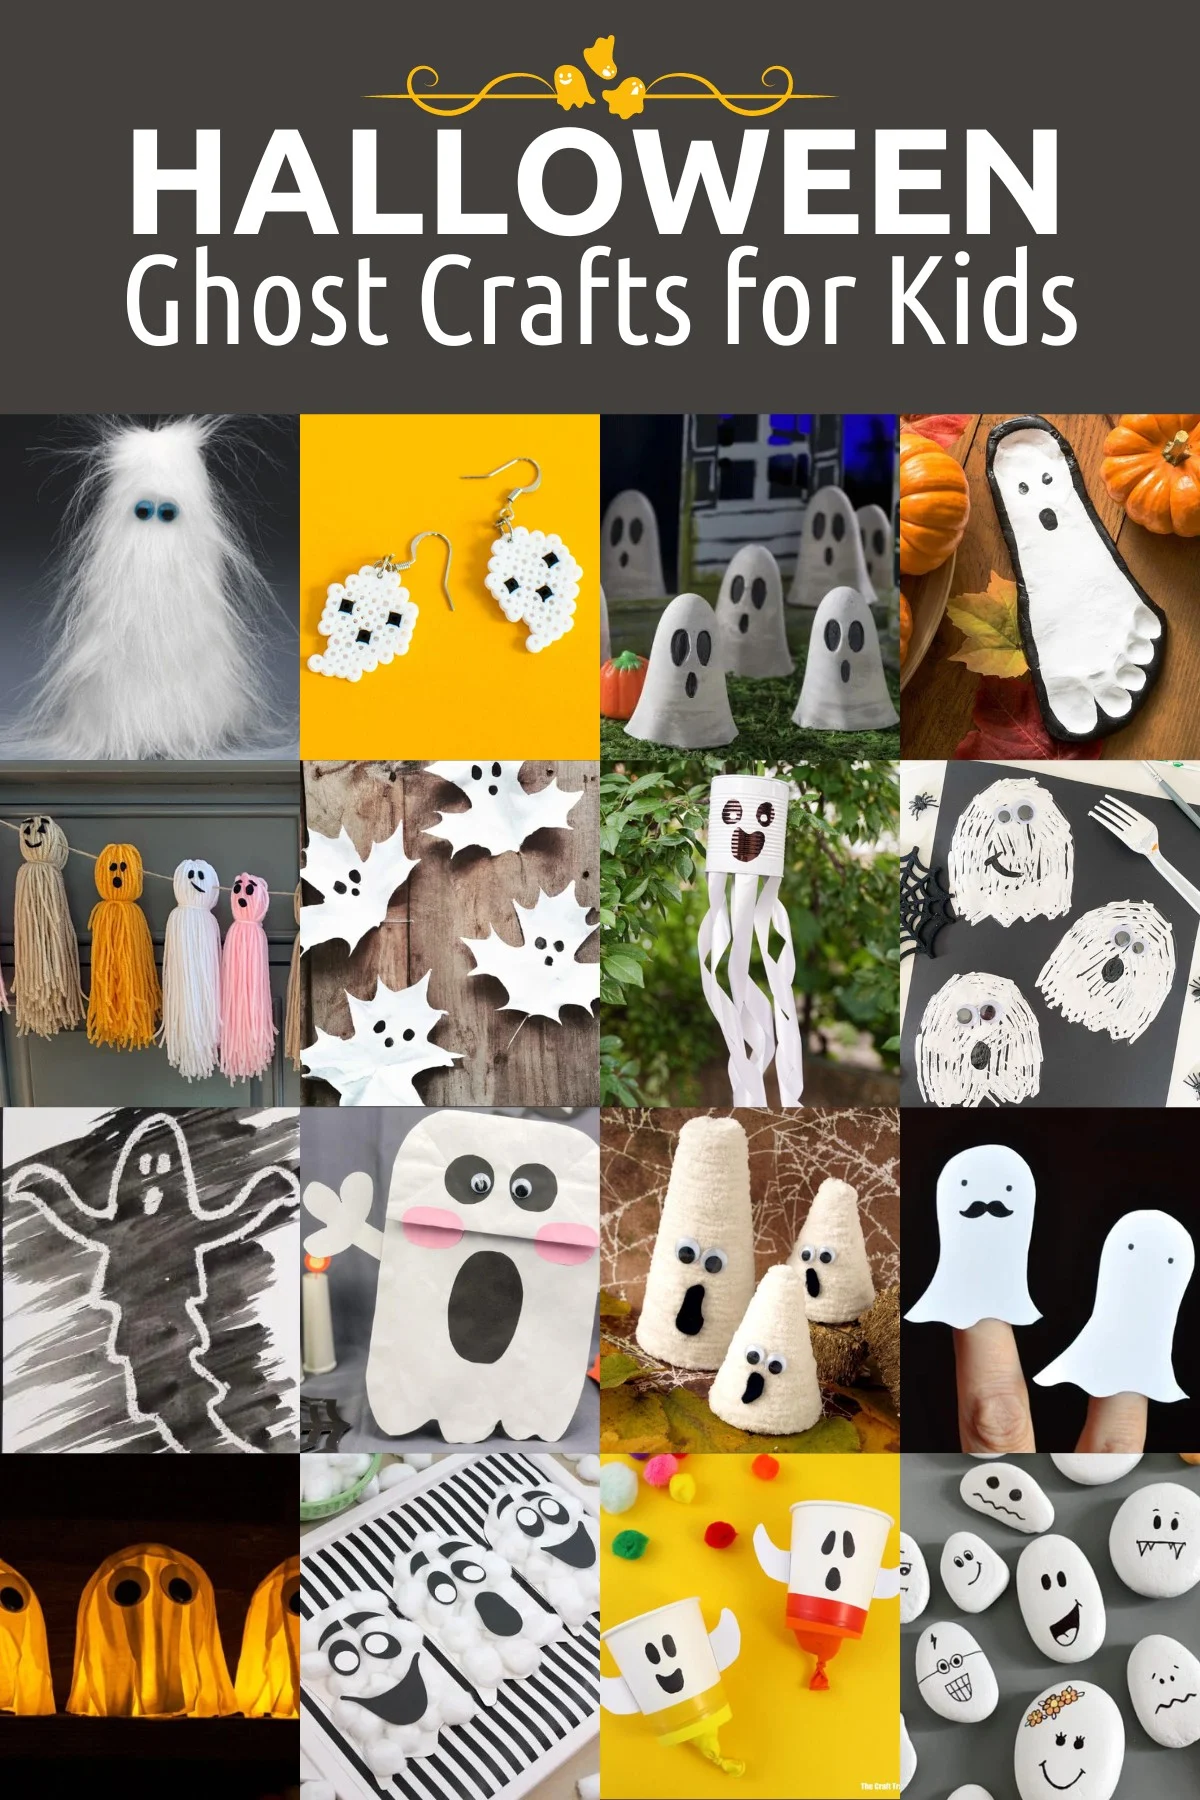 Ghost Crafts for Youngsters This Halloween - Artshow24